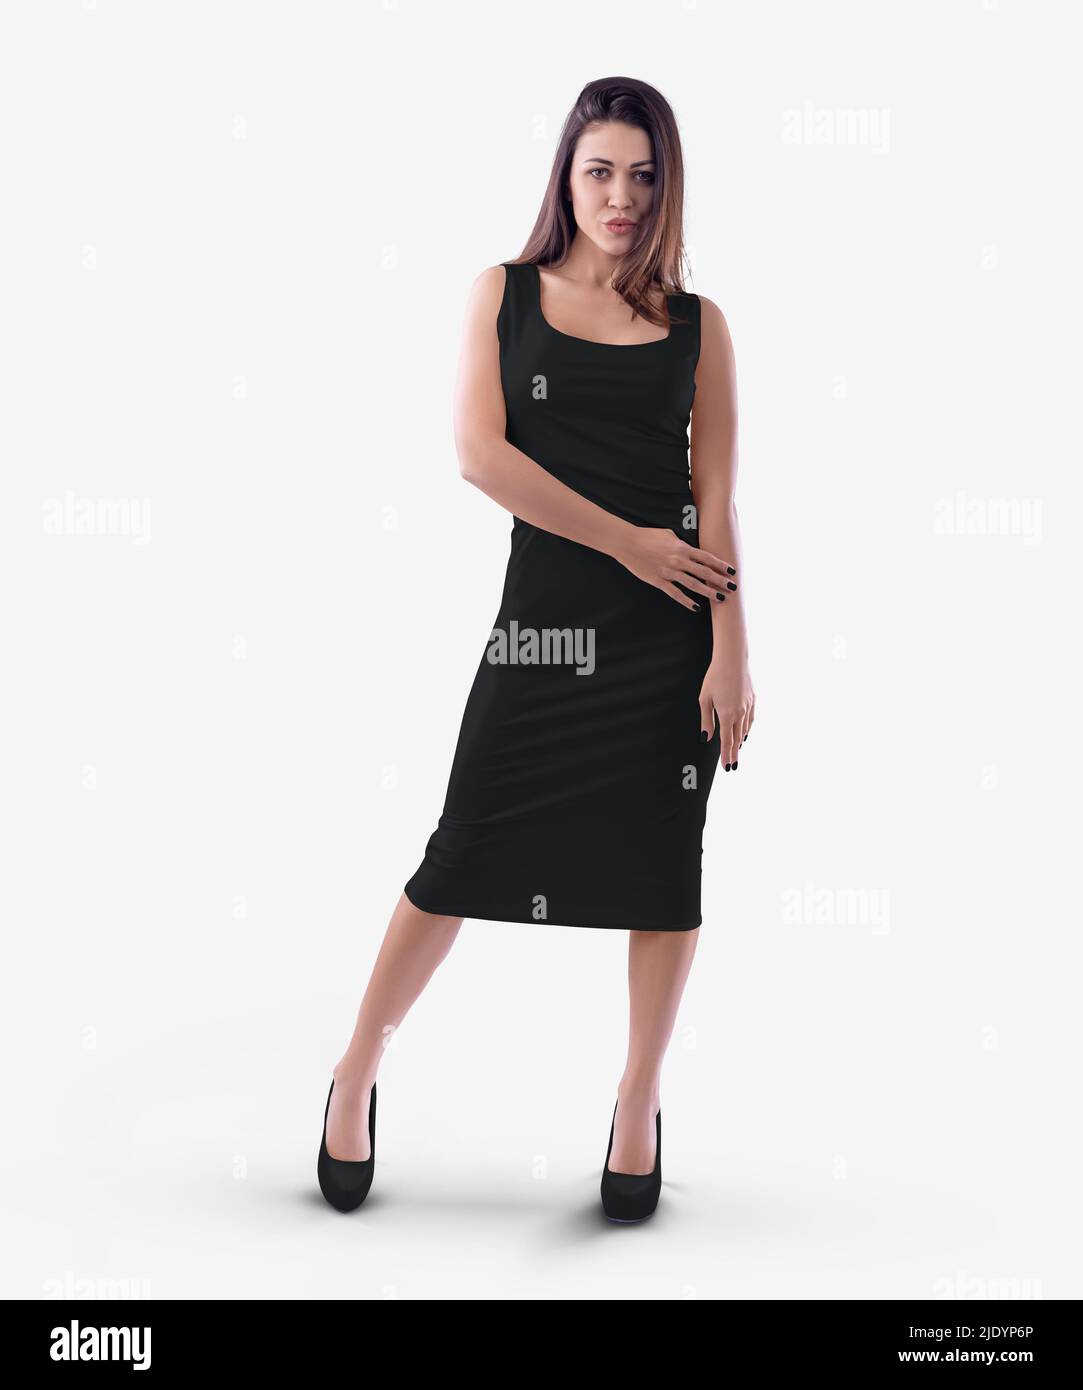 Mockup of a black tight knee-length dress on a beautiful girl, isolated on background, front view. Blank sleeveless sundress template, for design, pat Stock Photo